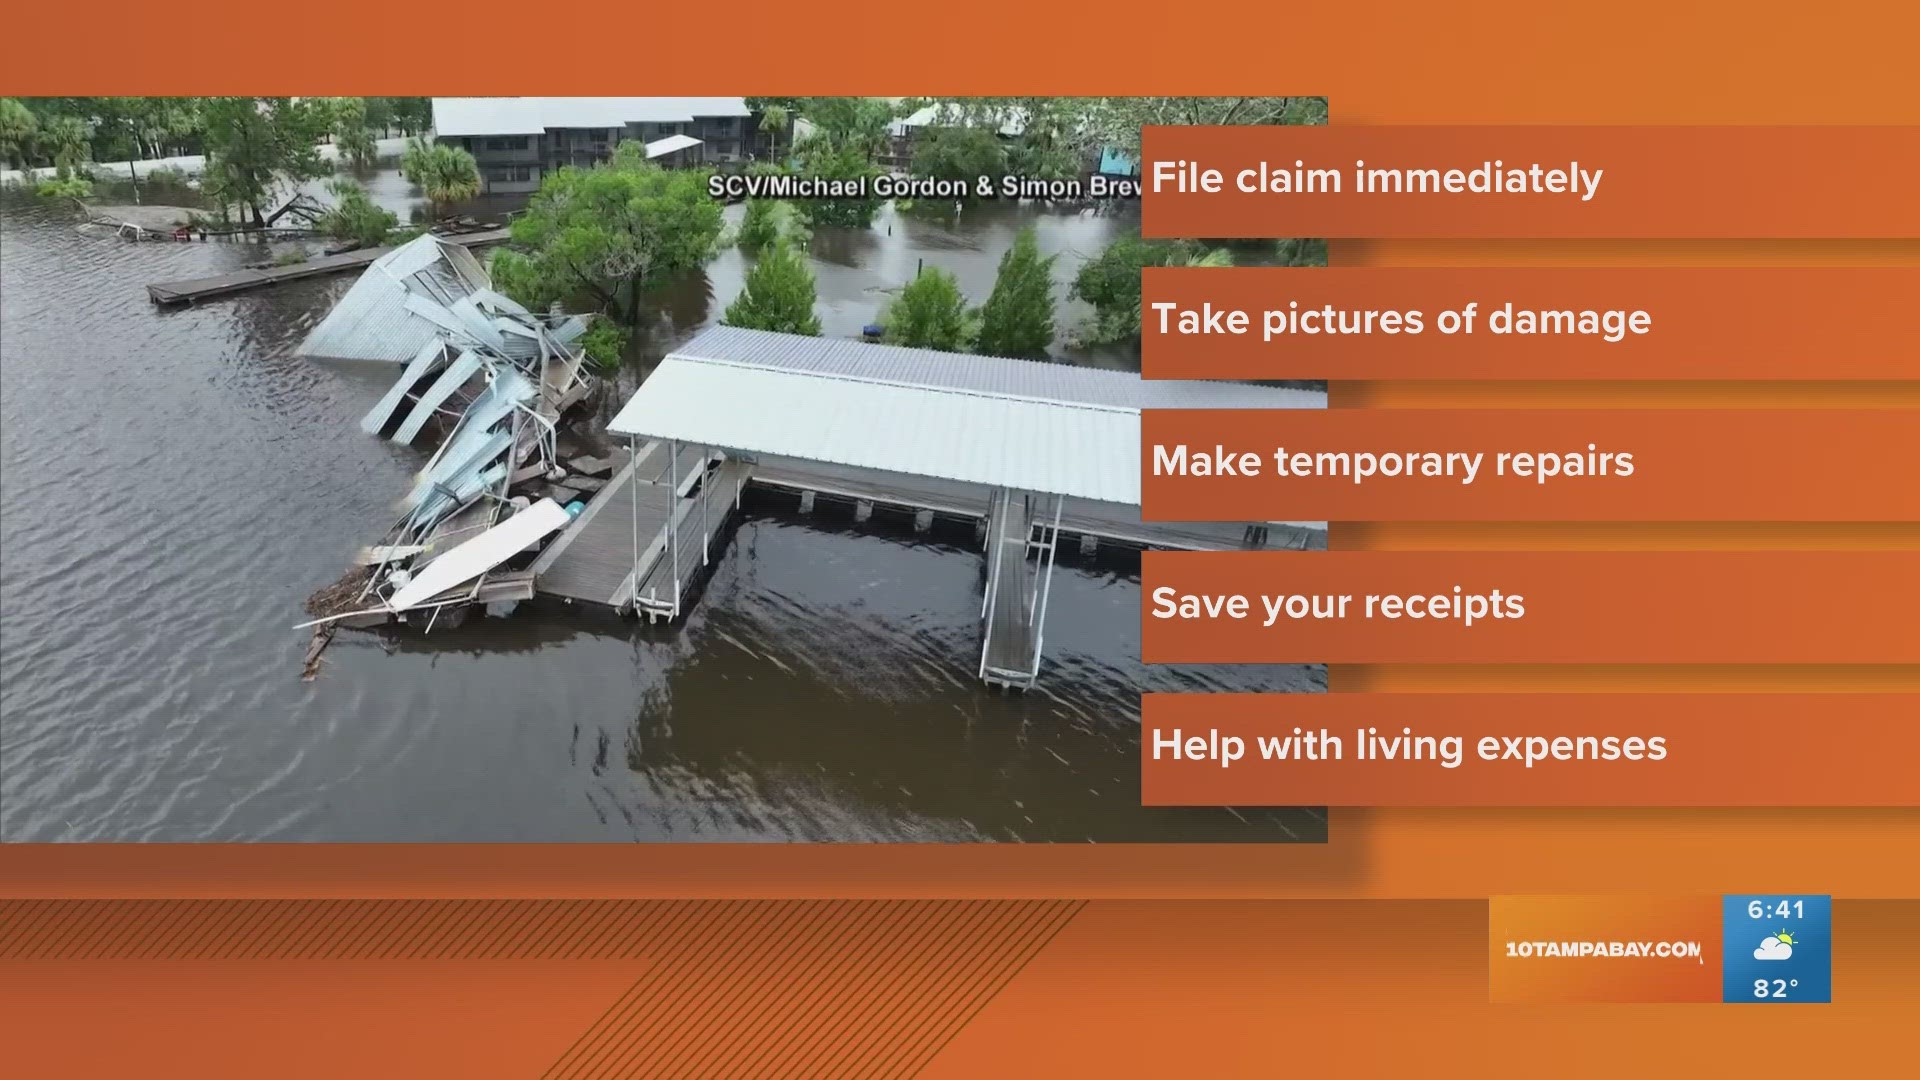 After Idalia, many homeowners will be trying to recover their homes from flooding and other storm damages. Here are the things experts say are important to remember.